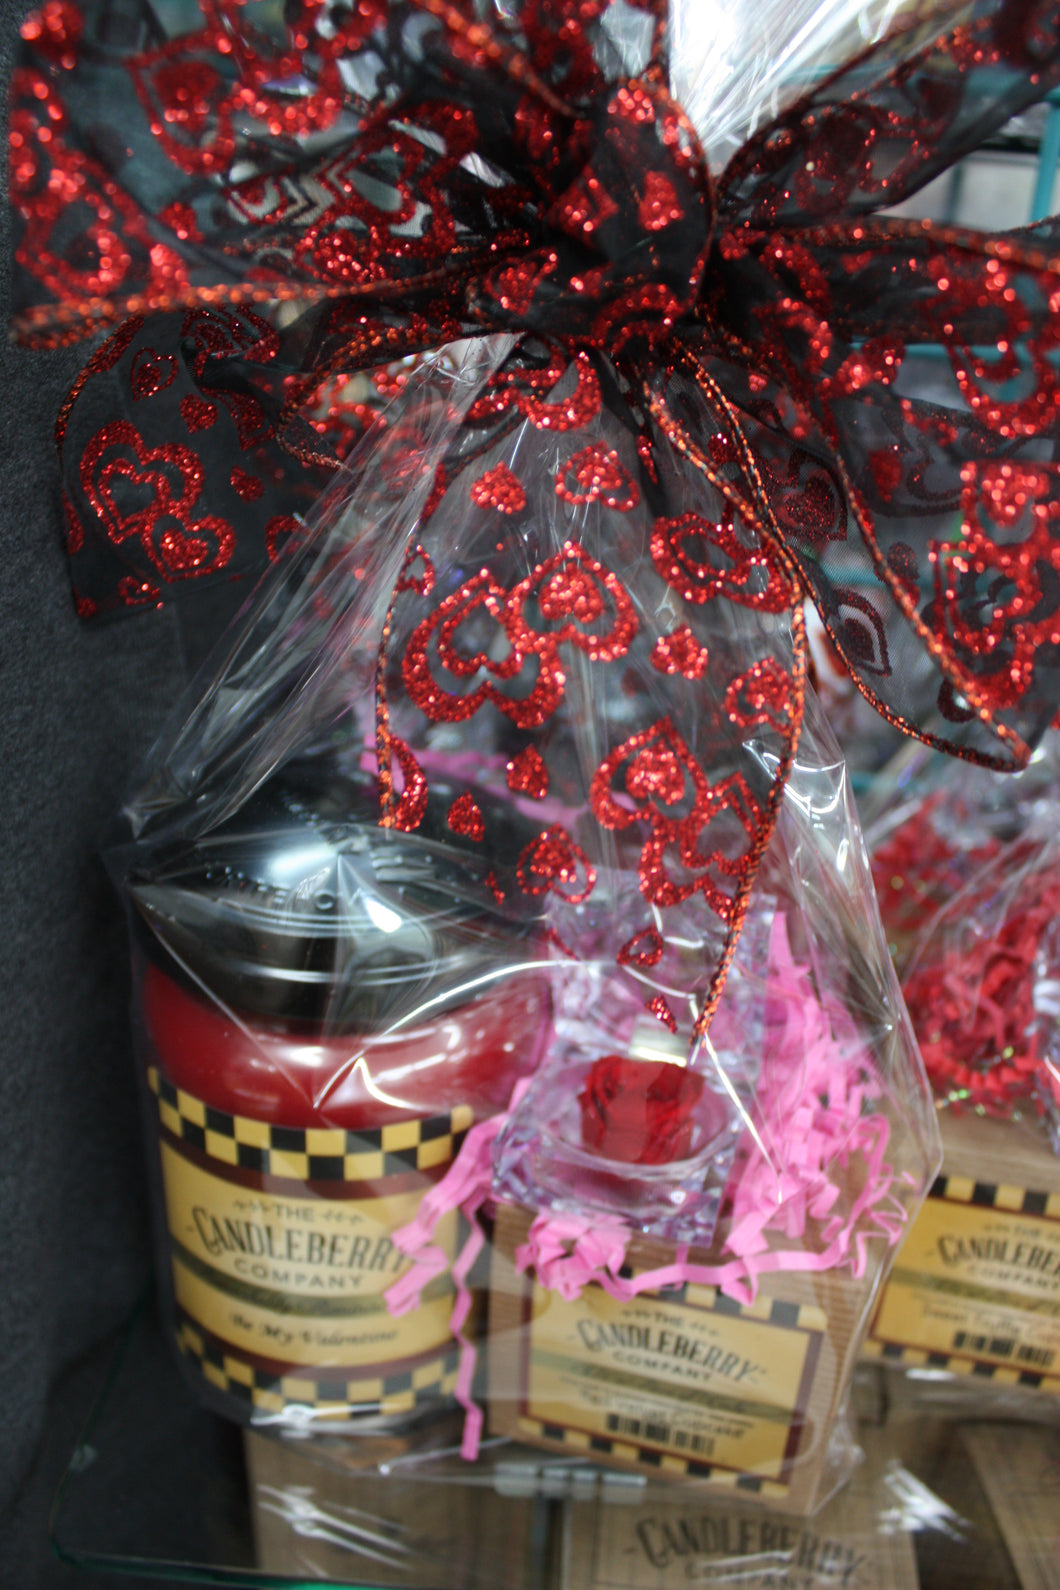 Candleberry gift basket/with ring box